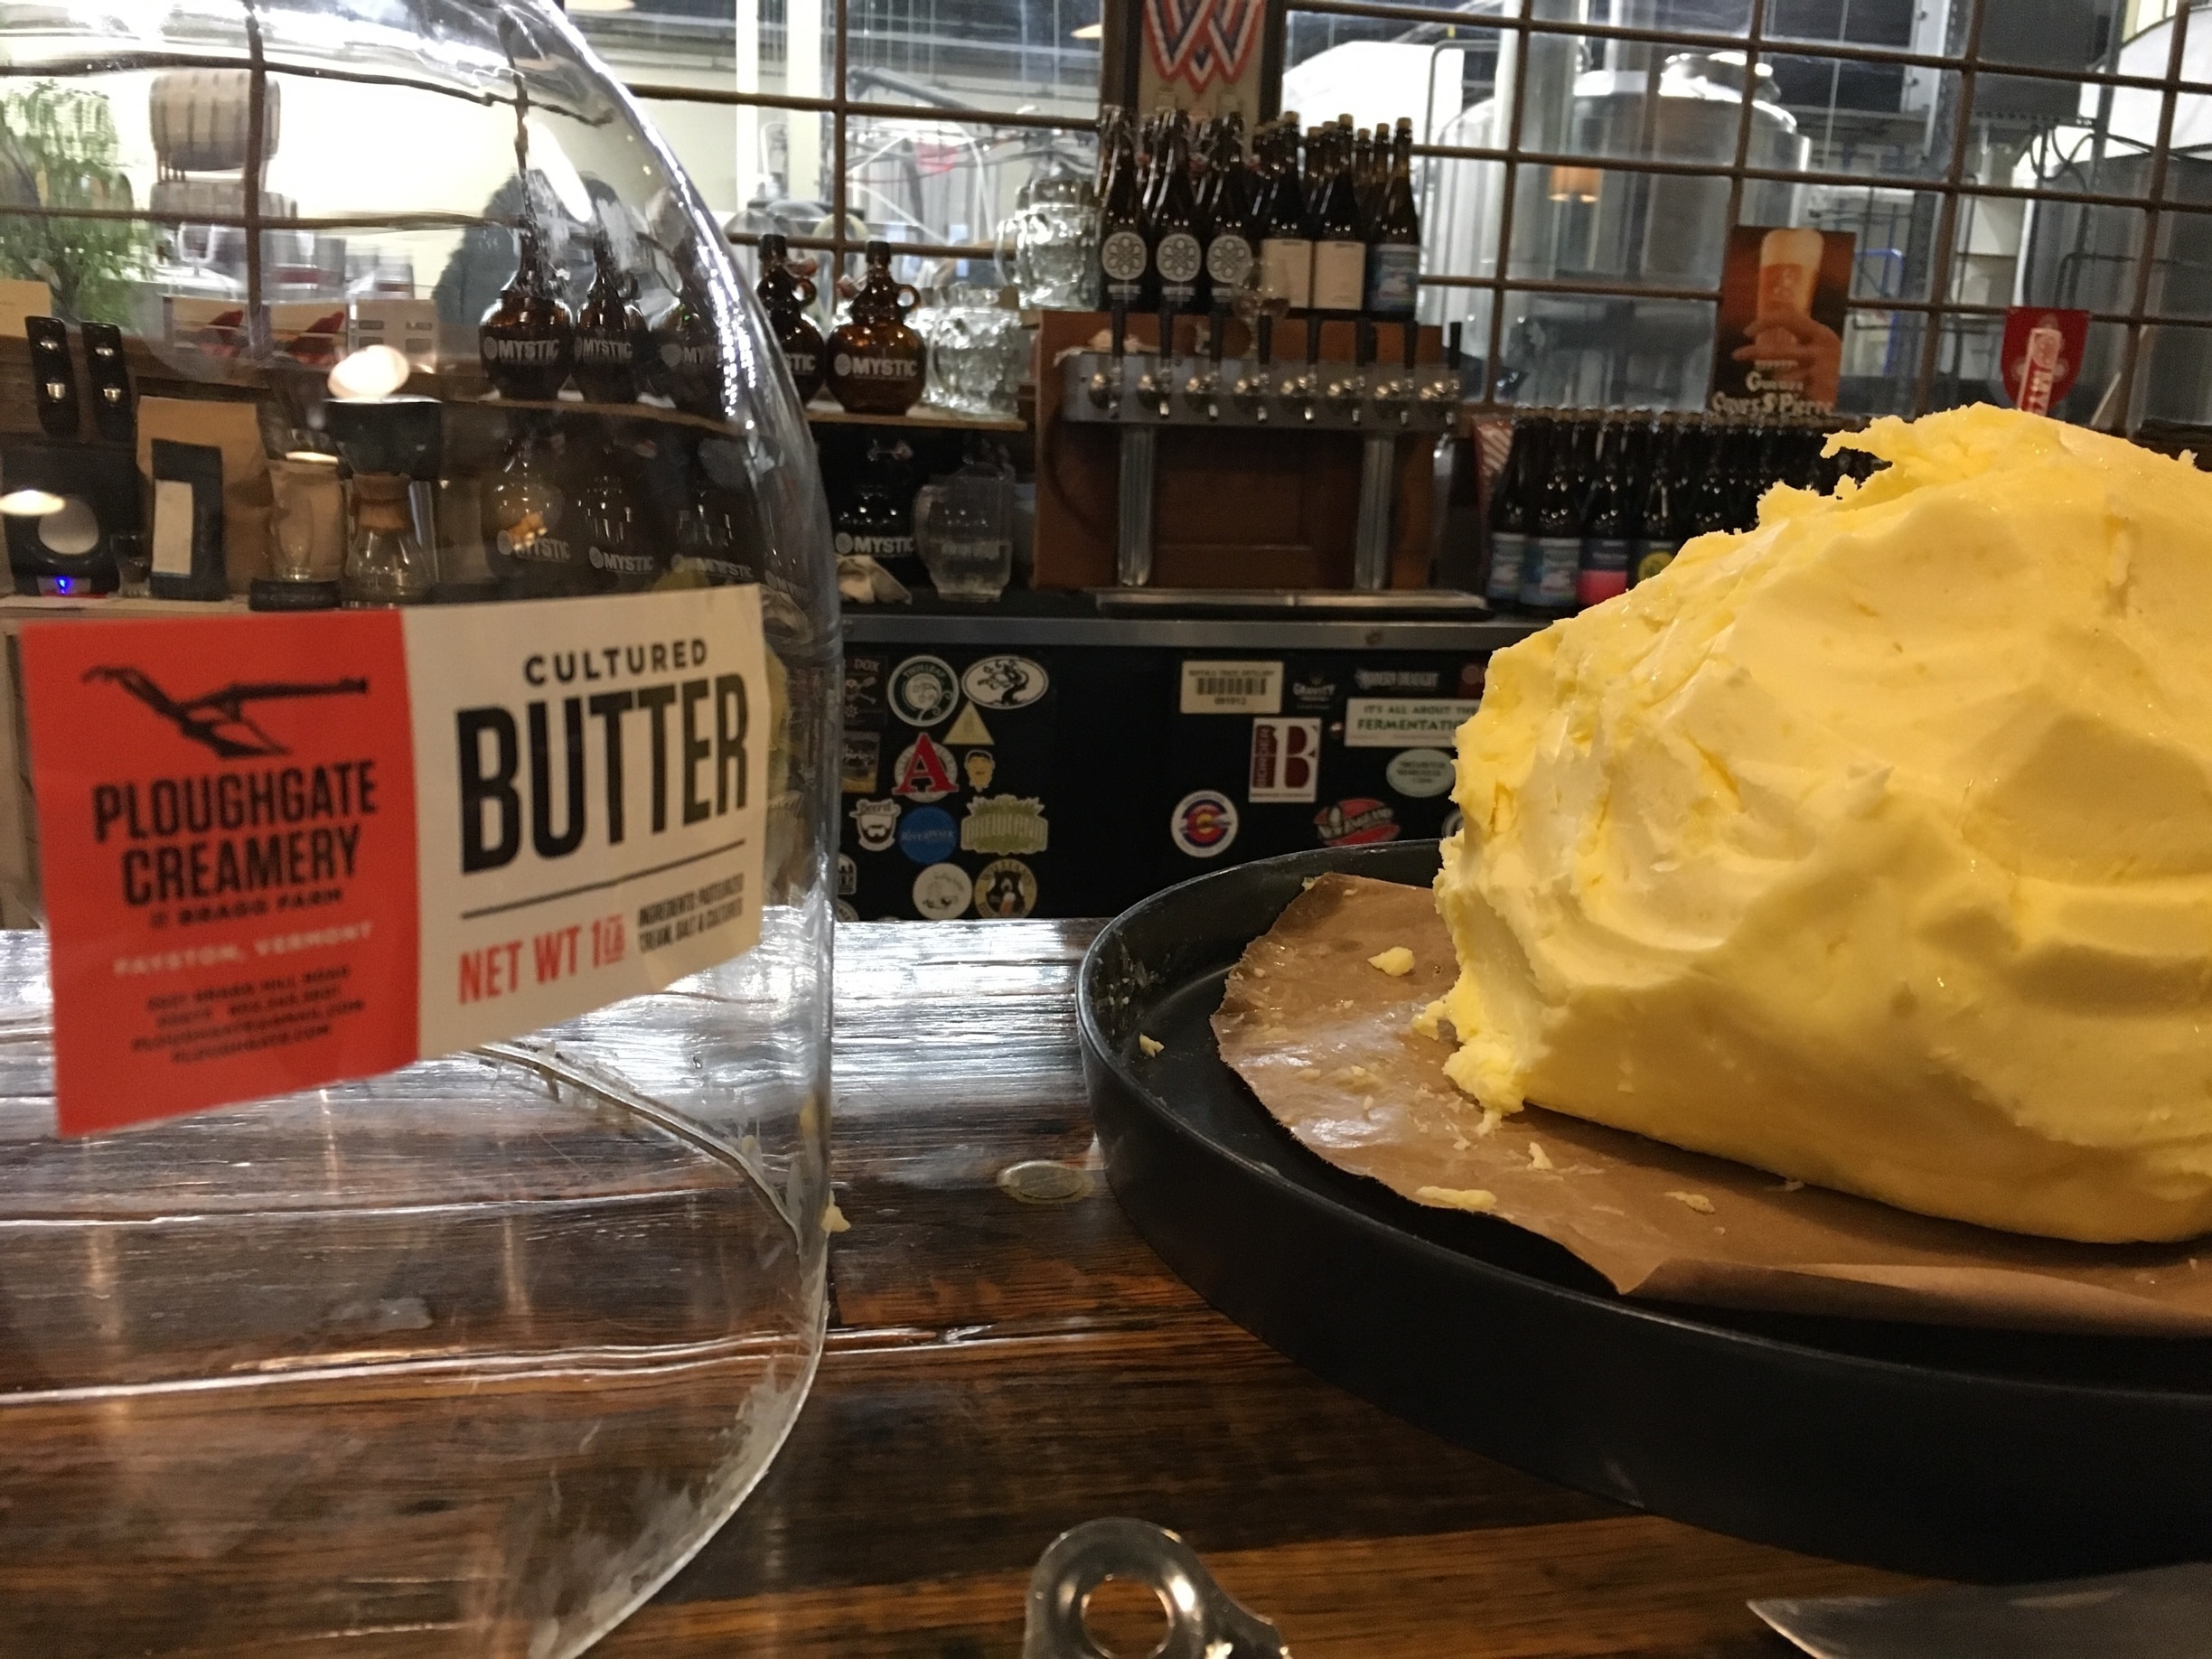 #FoodieFinds
#butter
Ploughgate Creamery
